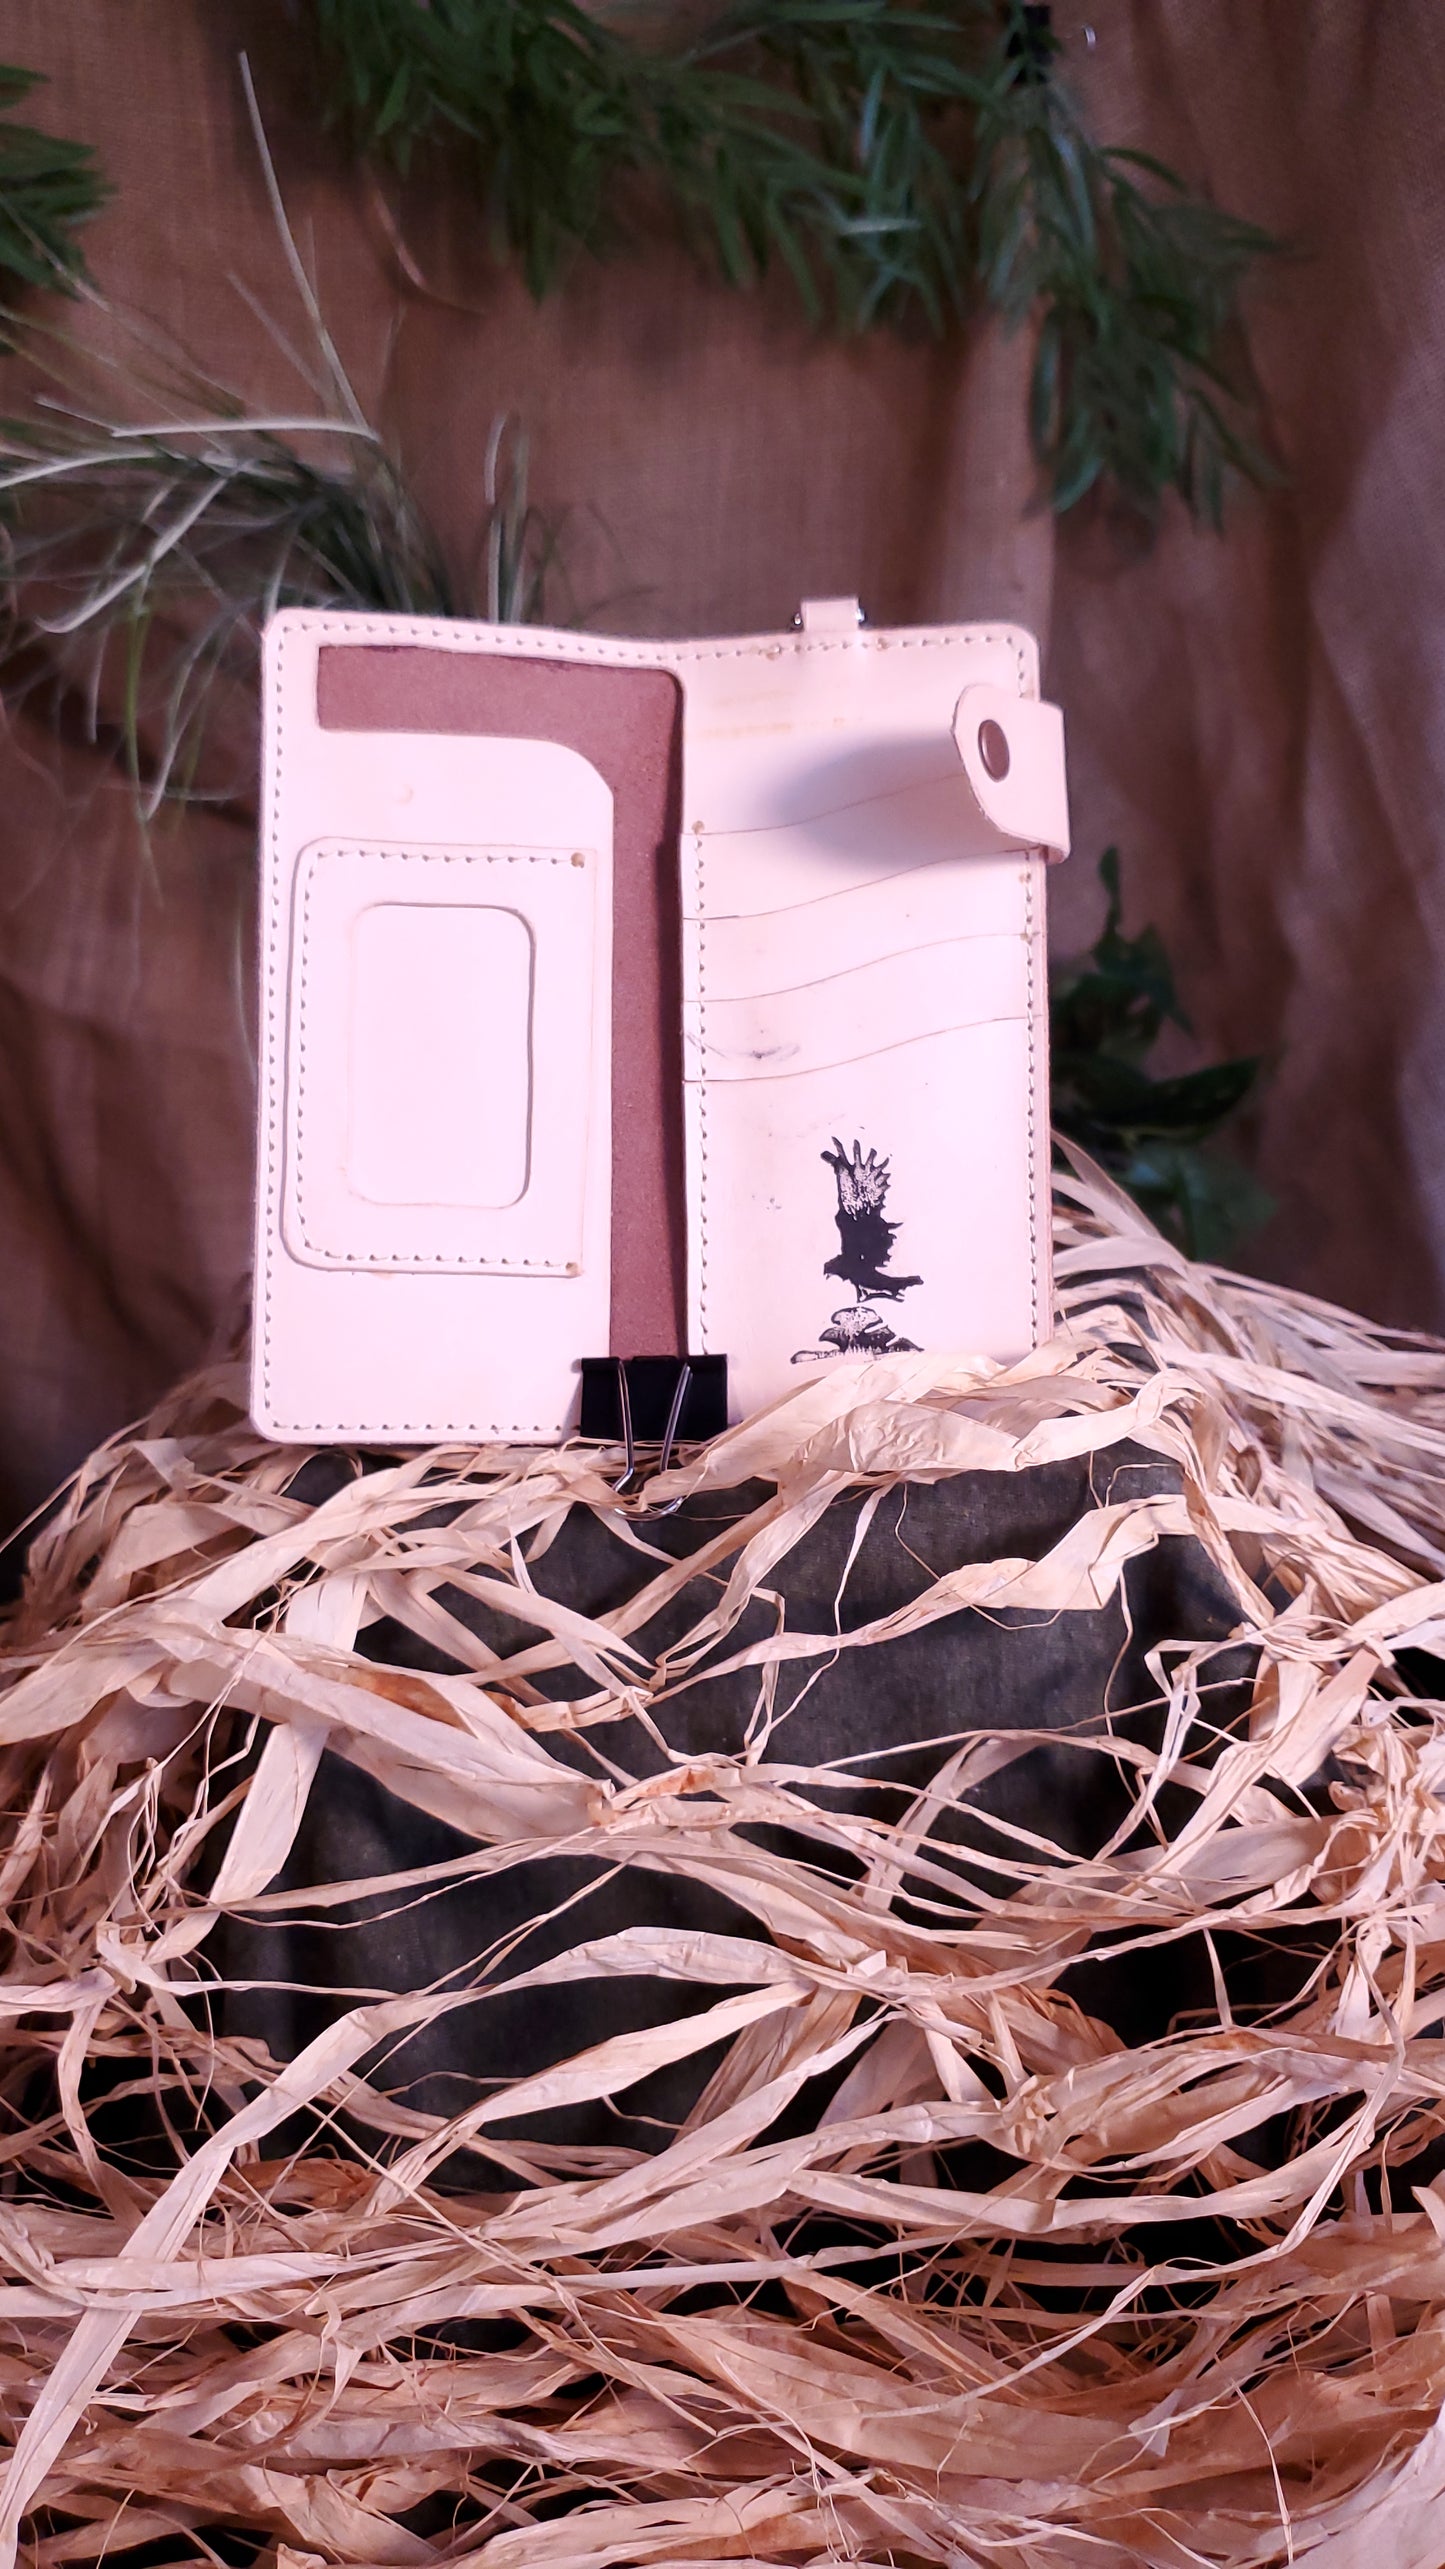 Interior of the Biker Wallet , featuring an ID pocket with window, a cash slot behind the ID pocket on the left side, four card slots on the right side. natural almost white colored interior